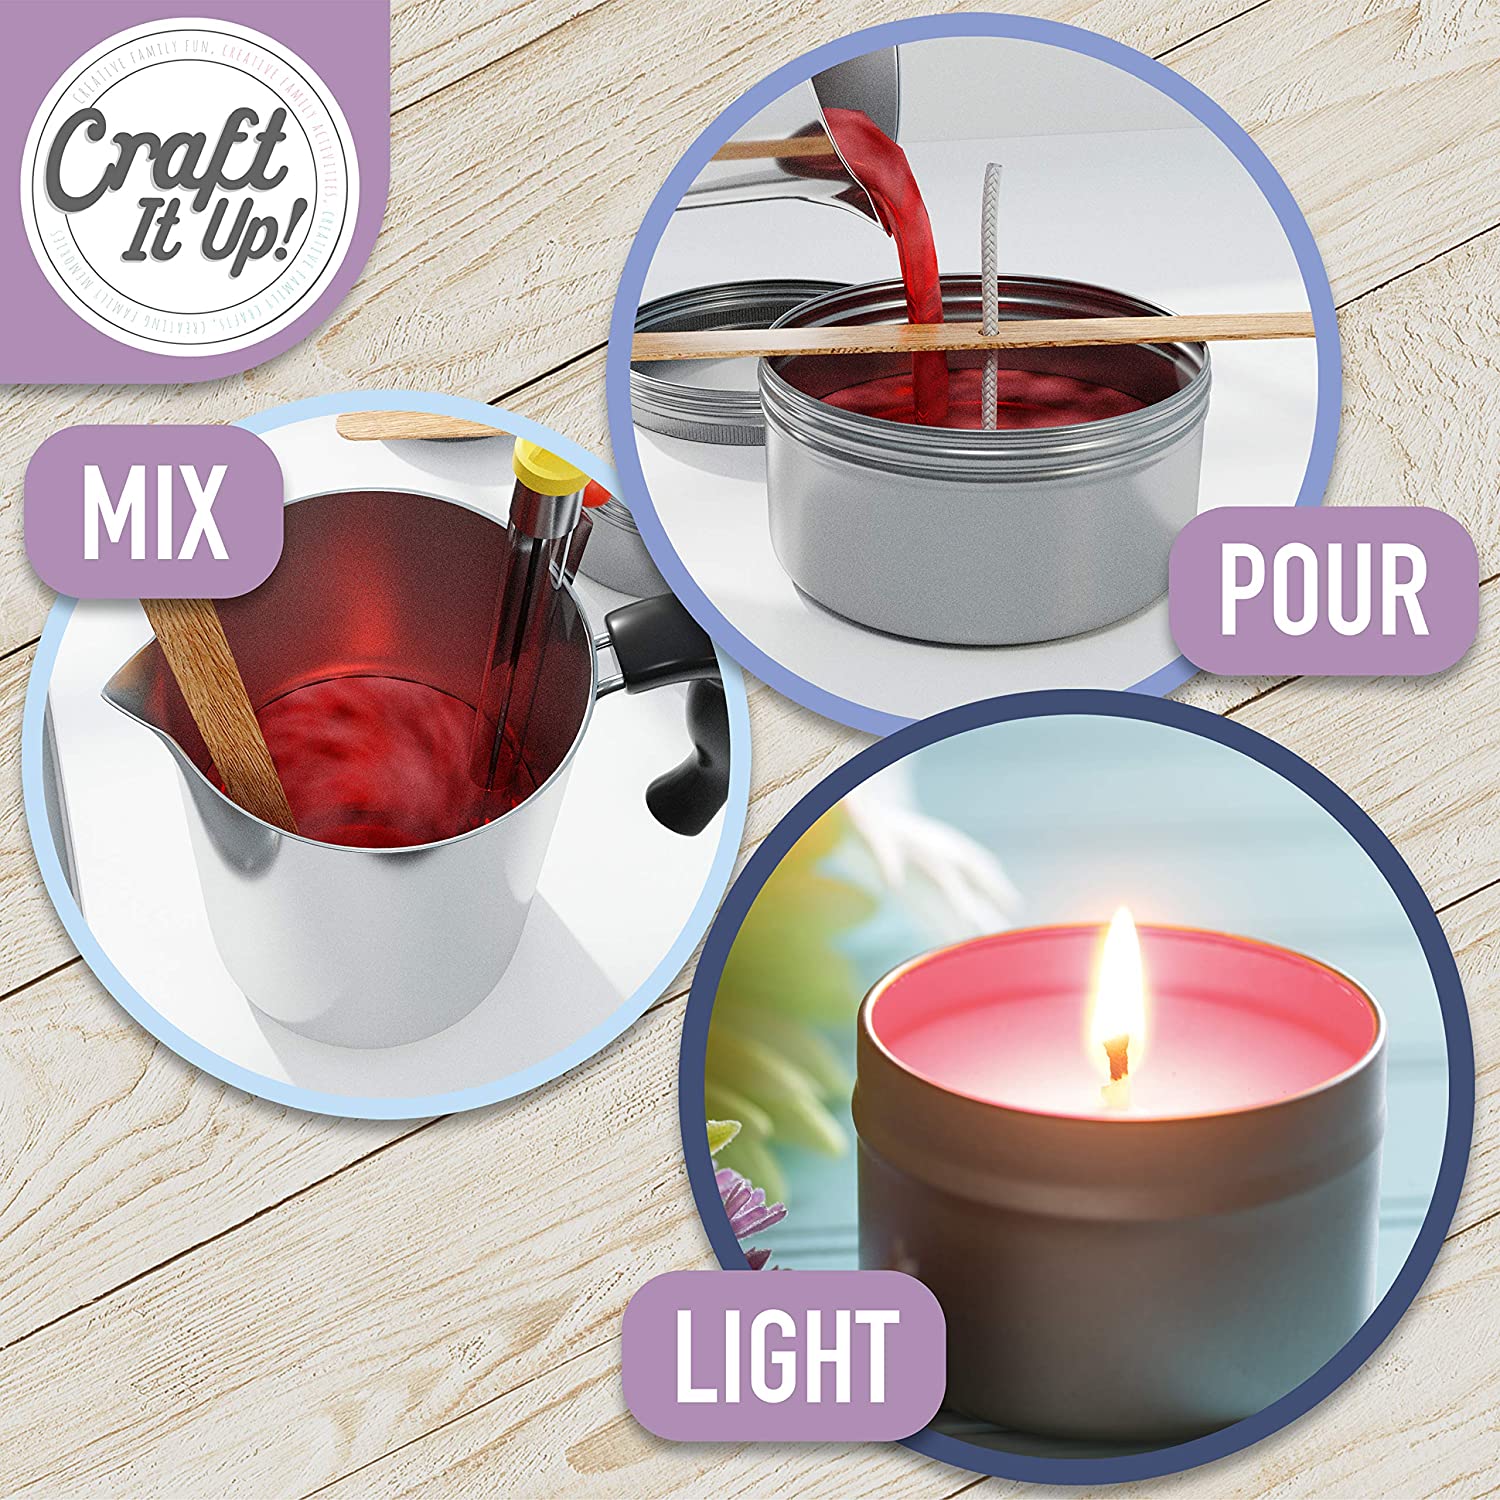 Candle Making Kit by Craft It Up! Complete DIY Beginners Set with Silicone Molds, Soy Candle Wax Supplies Plus Pot, Wicks, Essential Oils & More, Scented Homemade Candles Set for Teens & Adults - image 2 of 7